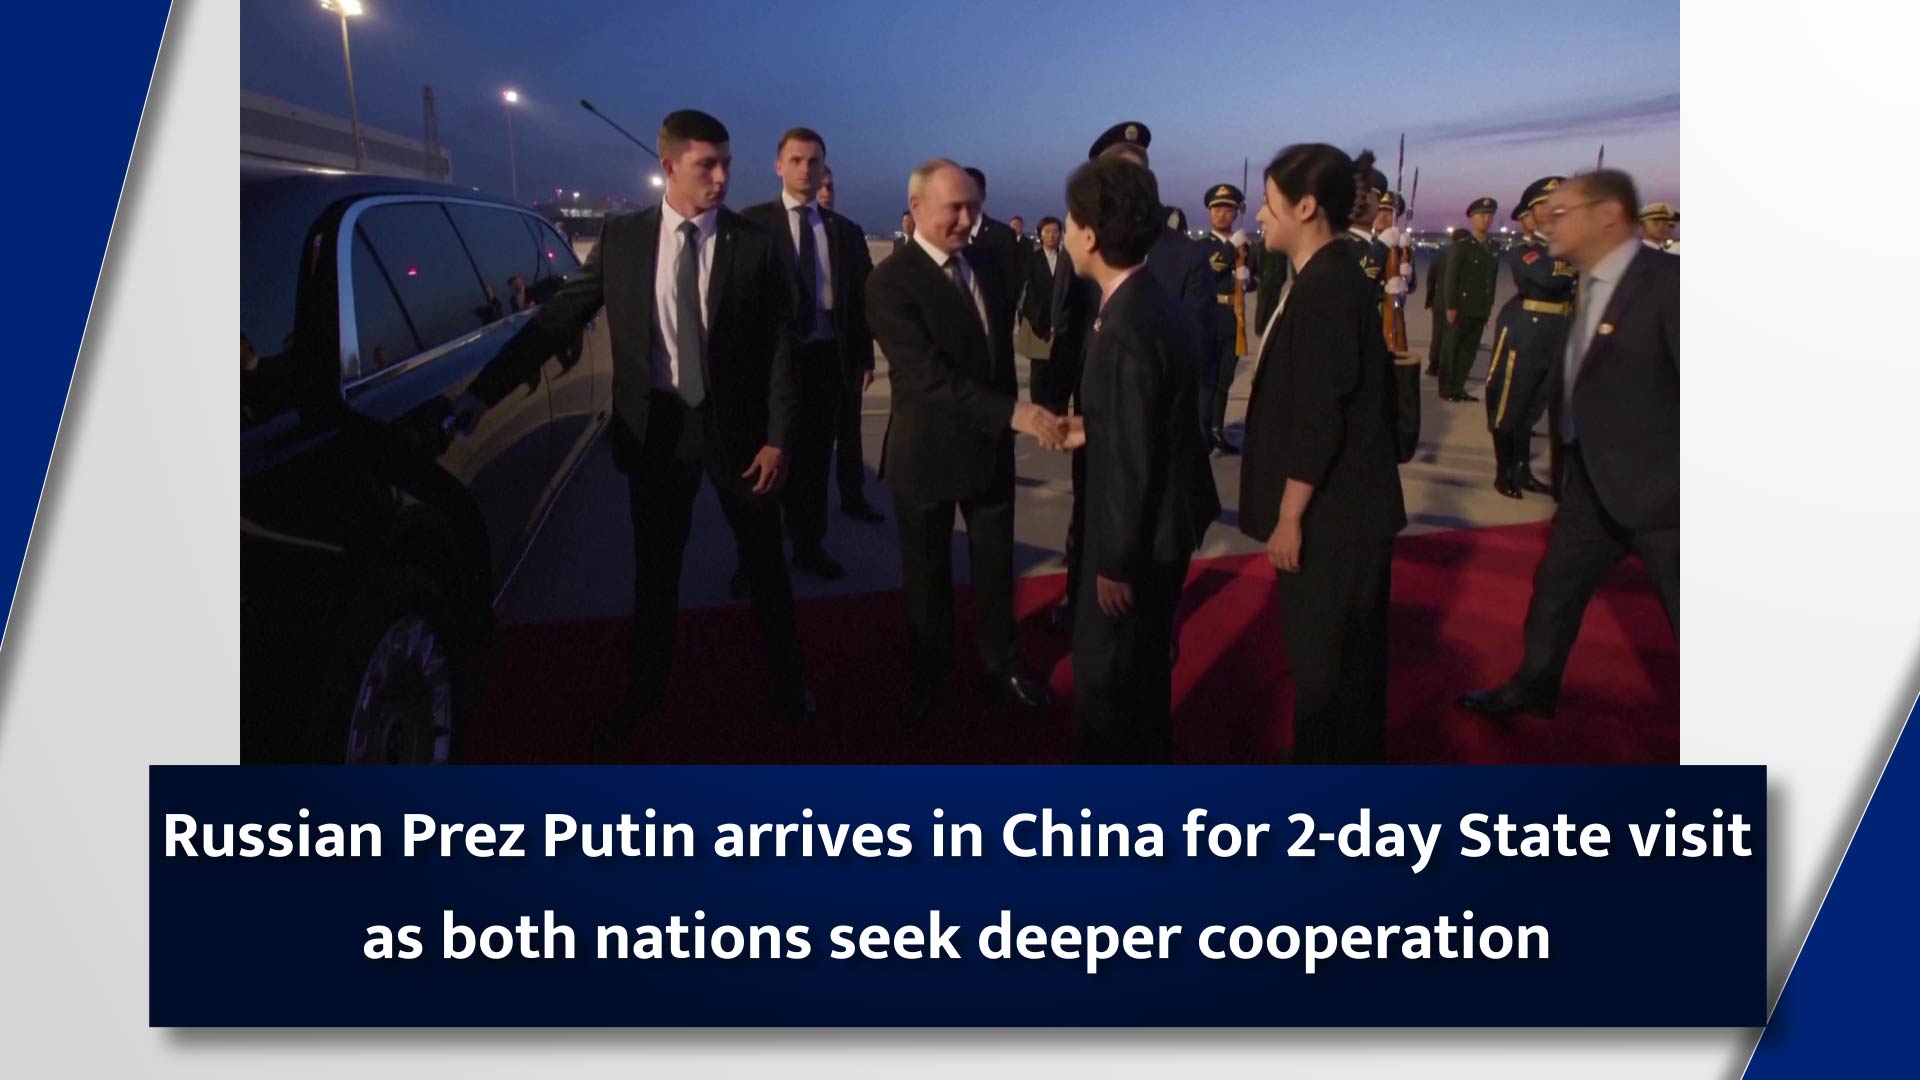 Russian Prez Putin arrives in China for 2-day State visit as both nations seek deeper cooperation